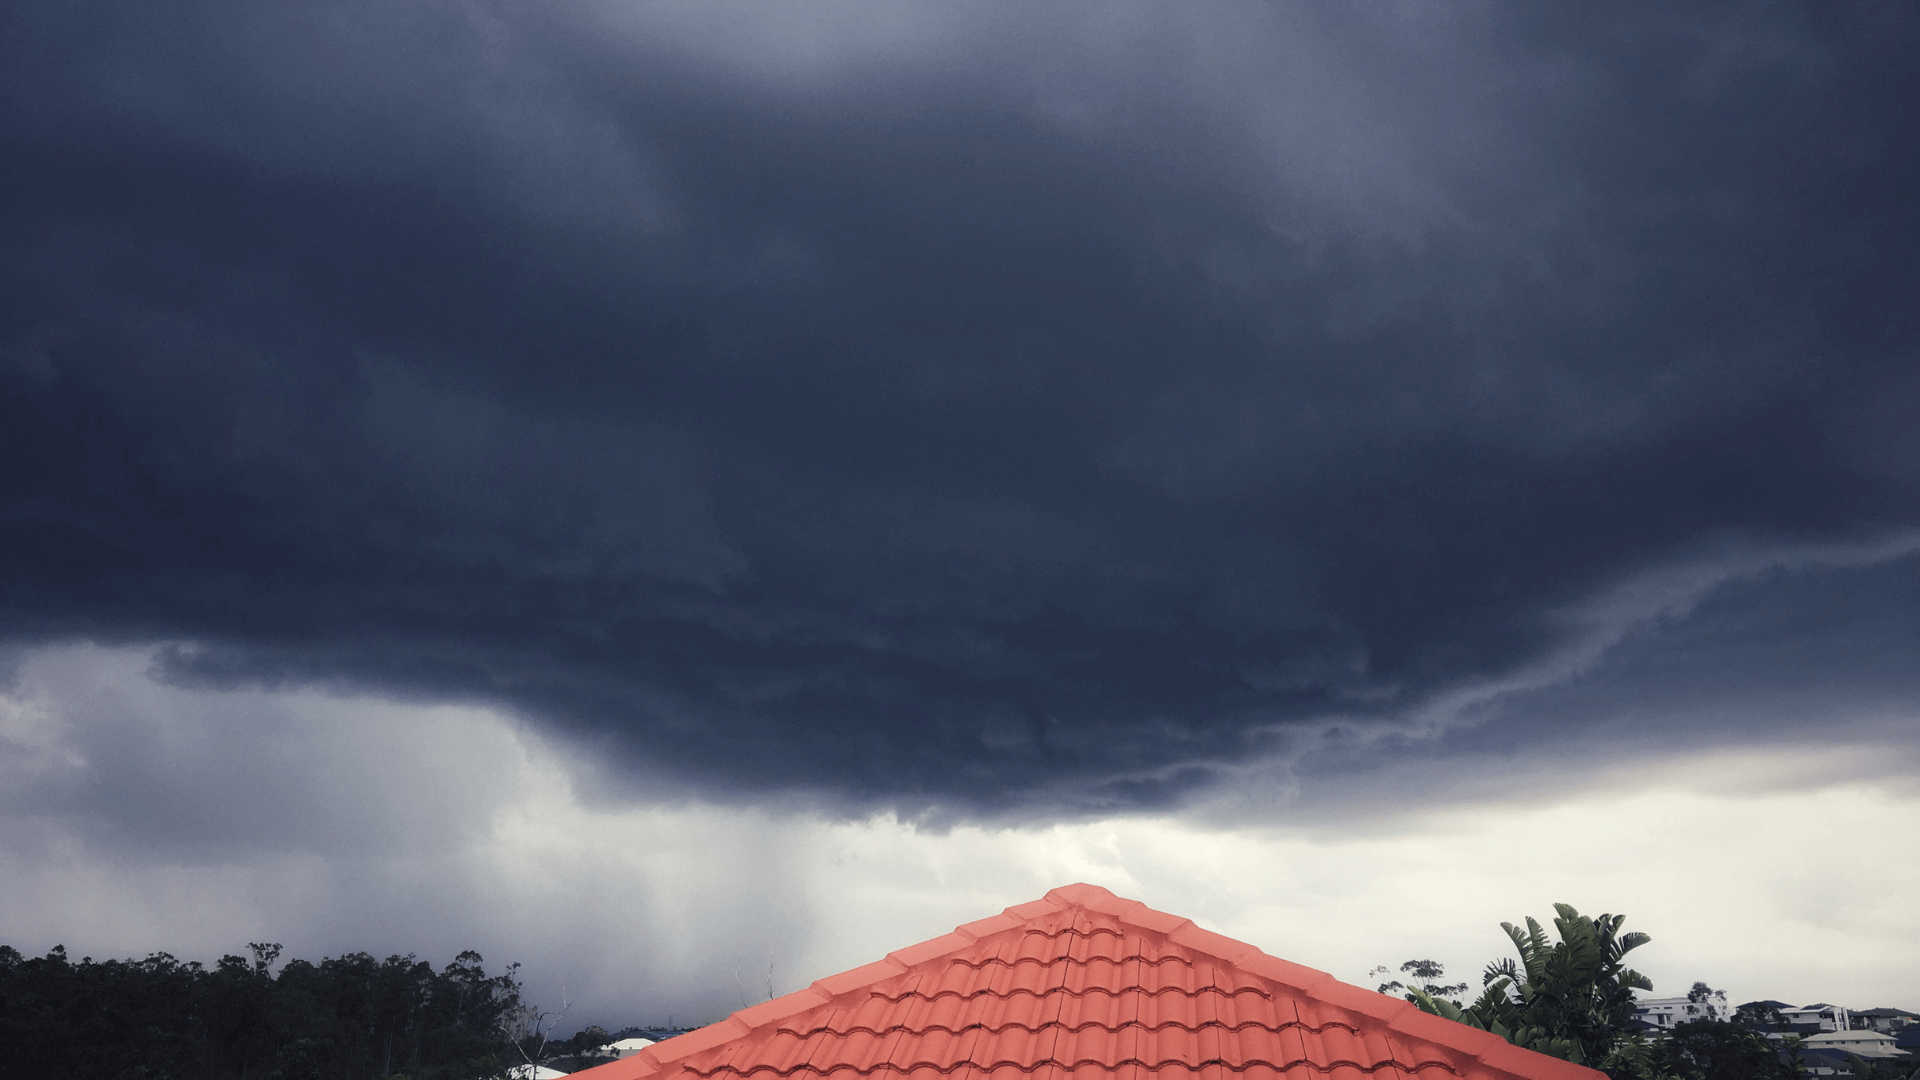 Storm over residential house